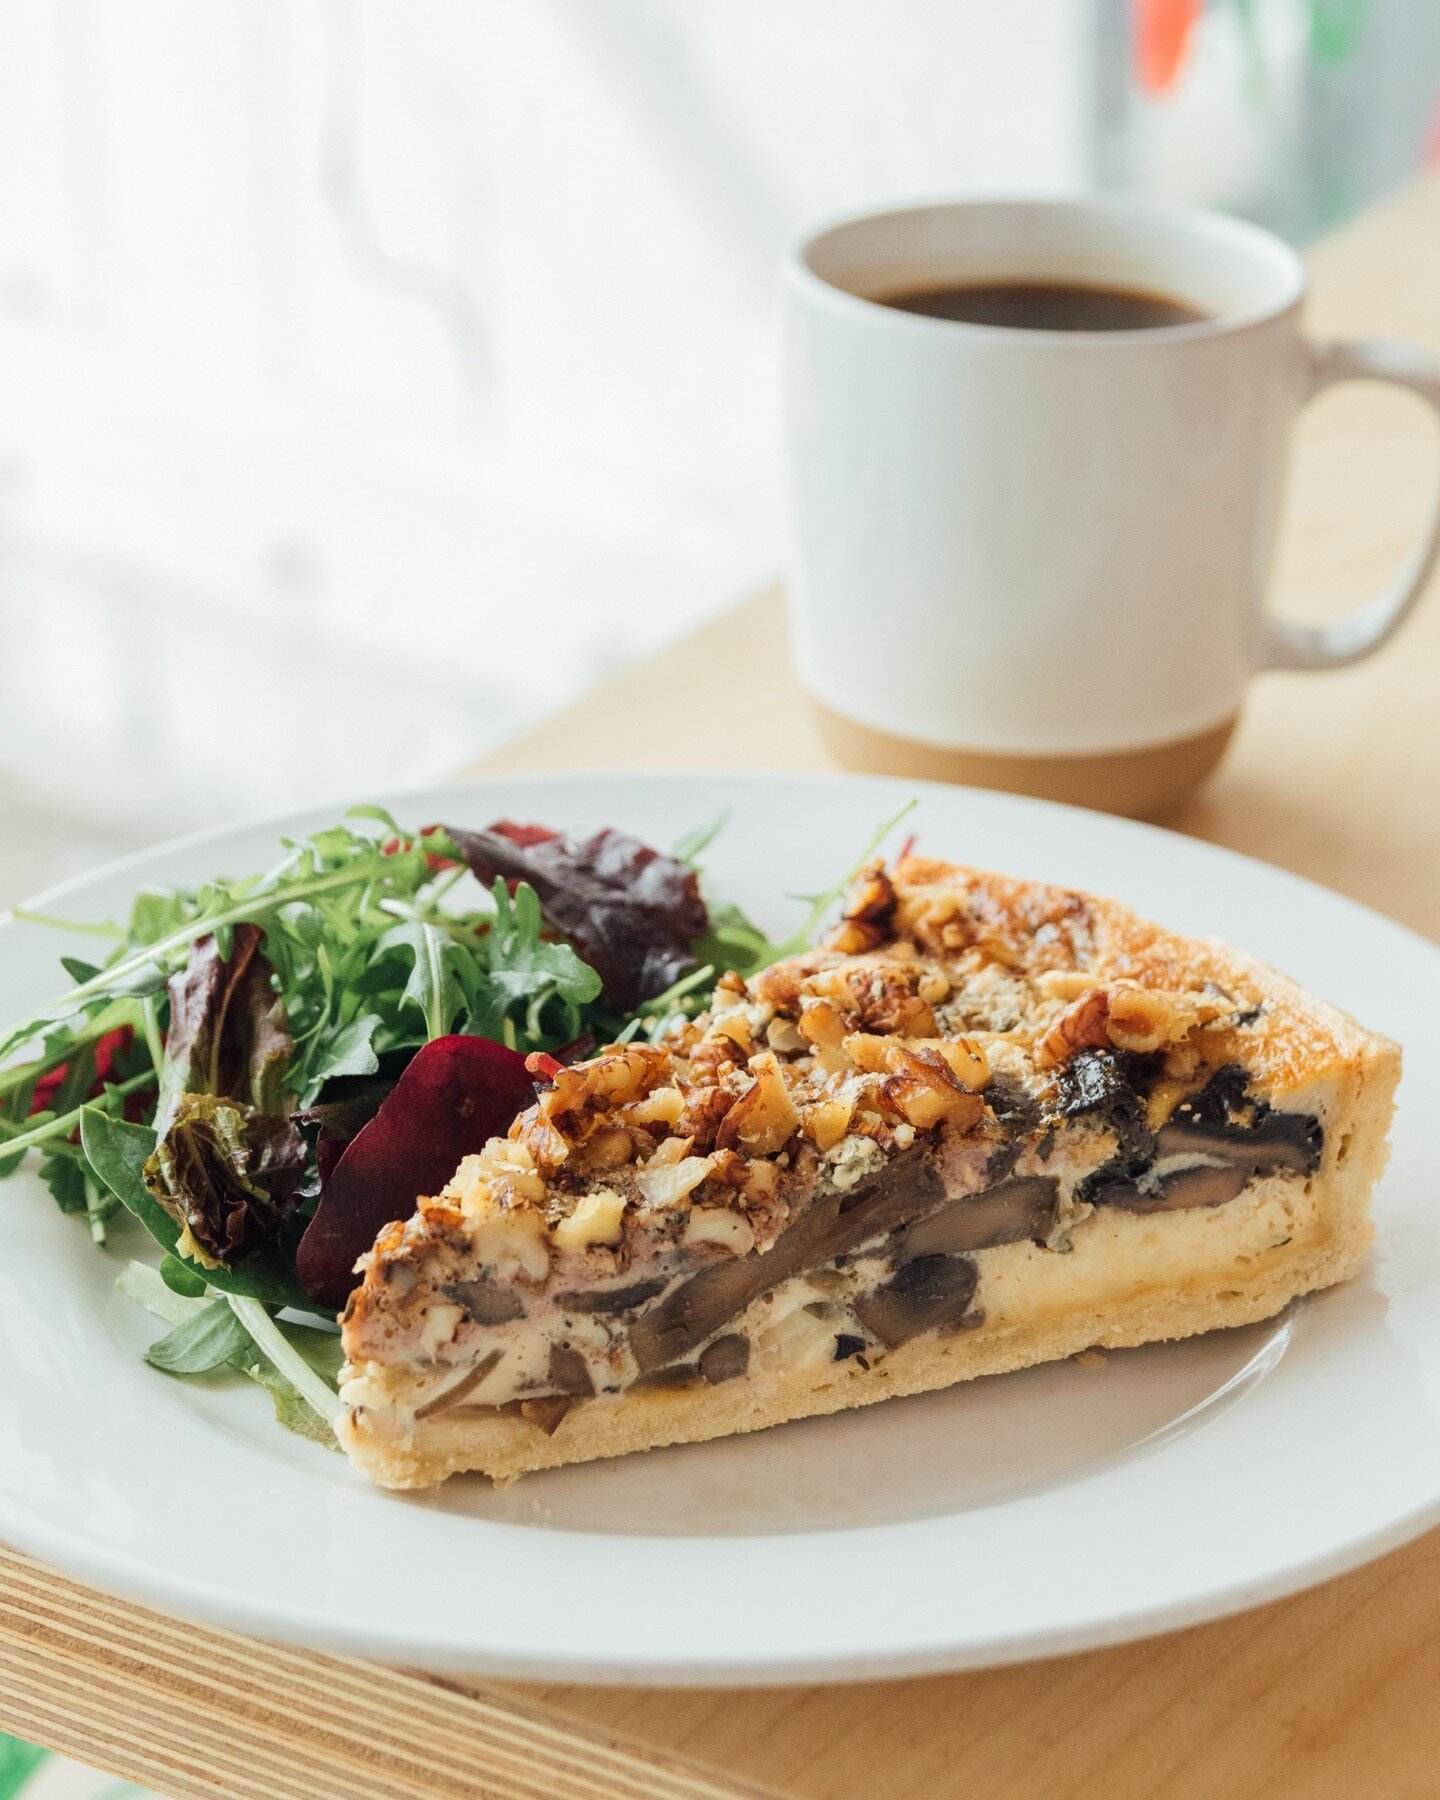 Simple but delicious...

Mushroom, Kentish blue cheese &amp; walnut quiche with salad and a black coffee! ☕️